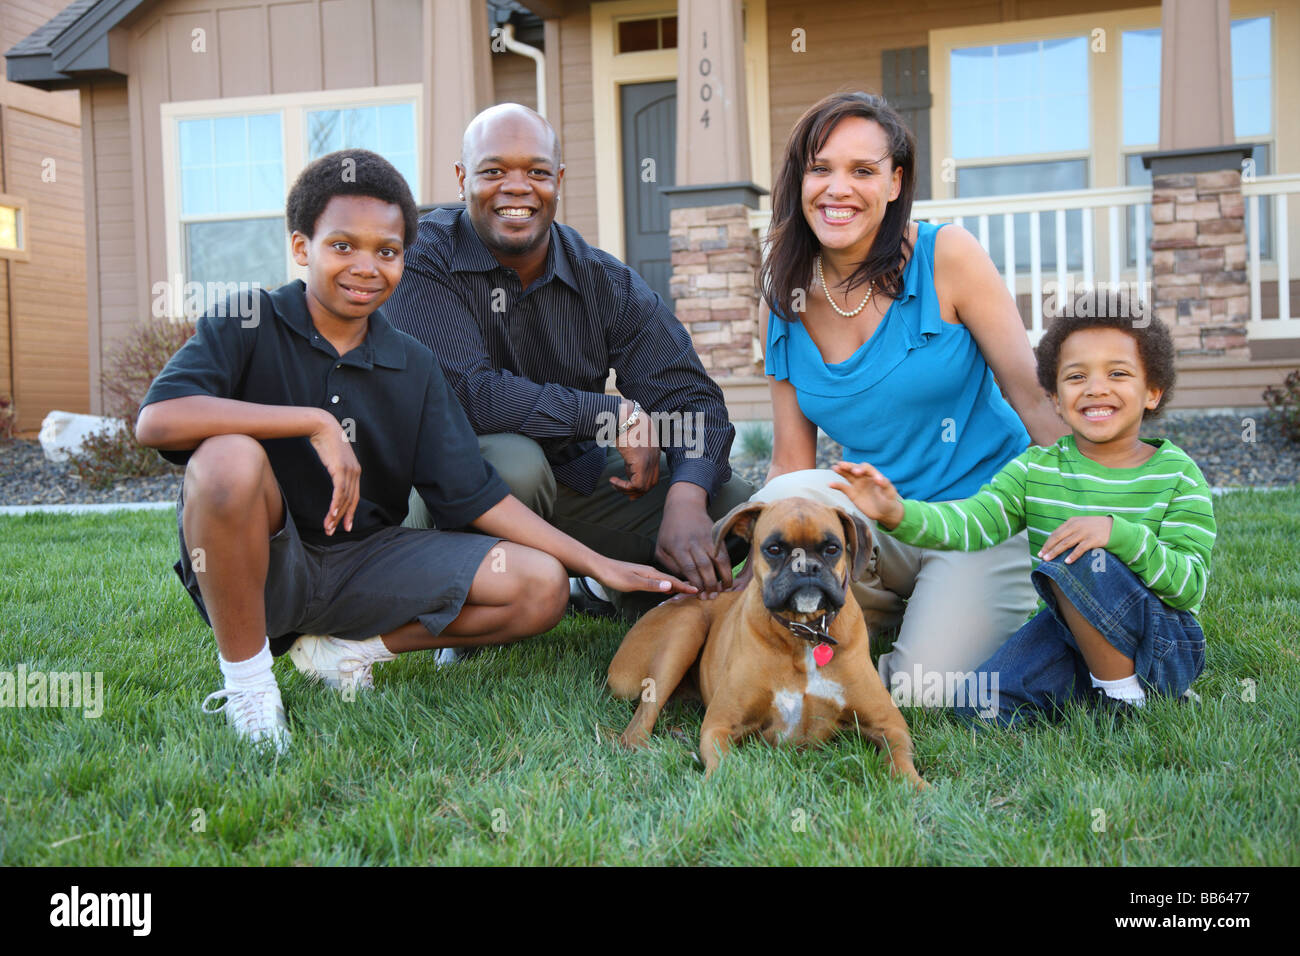 Family with dog in grass by home Stock Photo